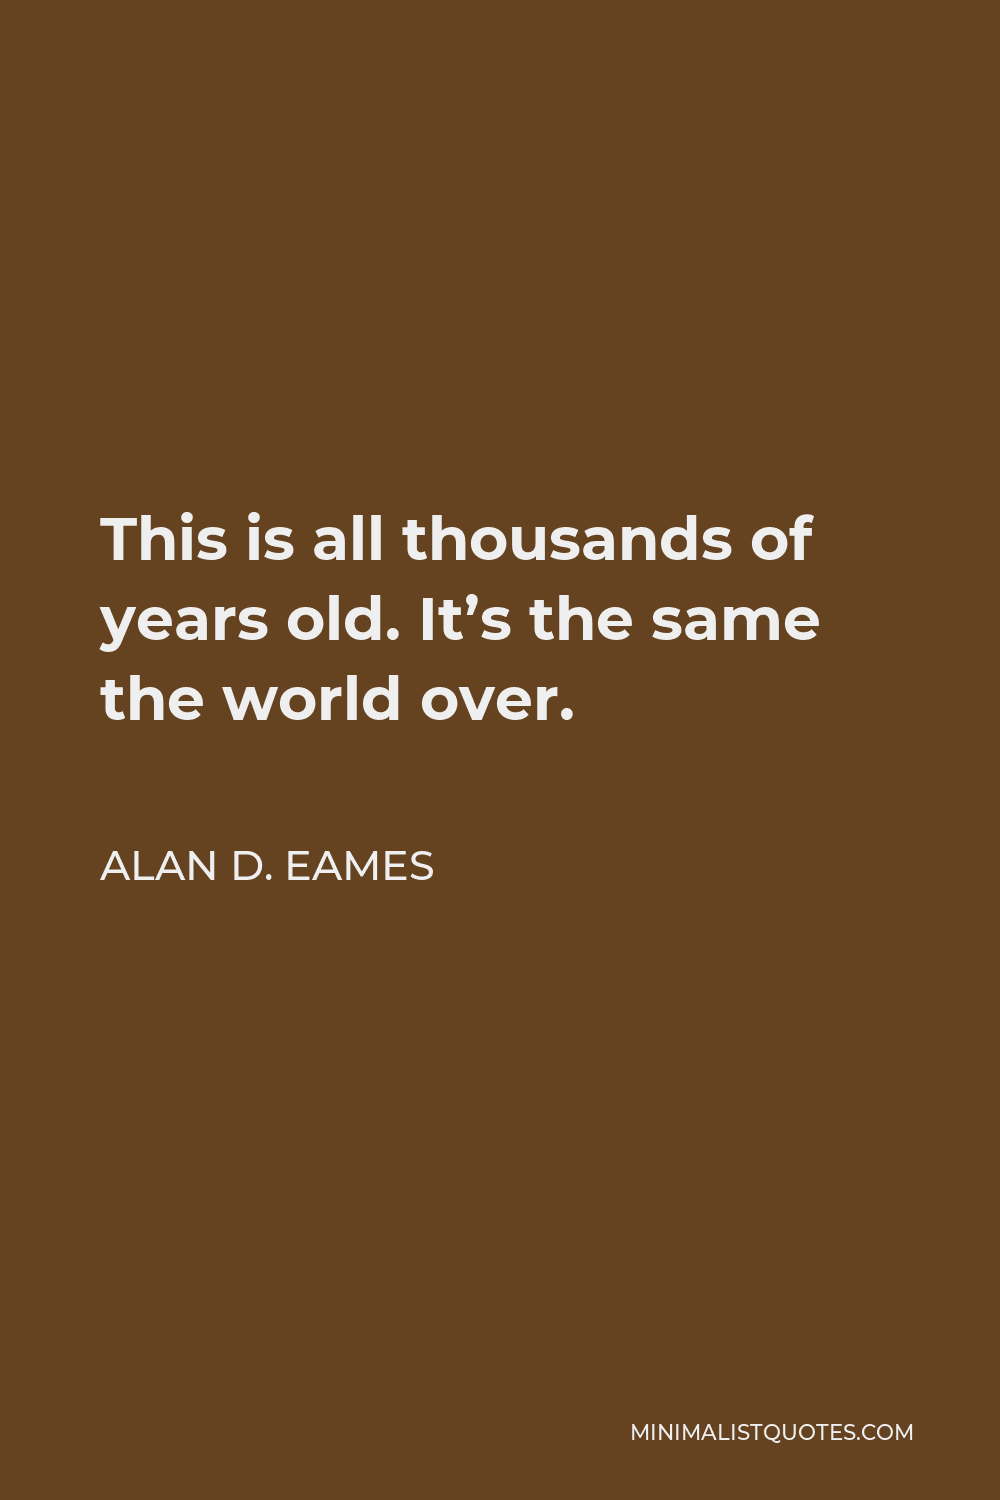 Alan D. Eames Quote - This is all thousands of years old. It’s the same the world over.